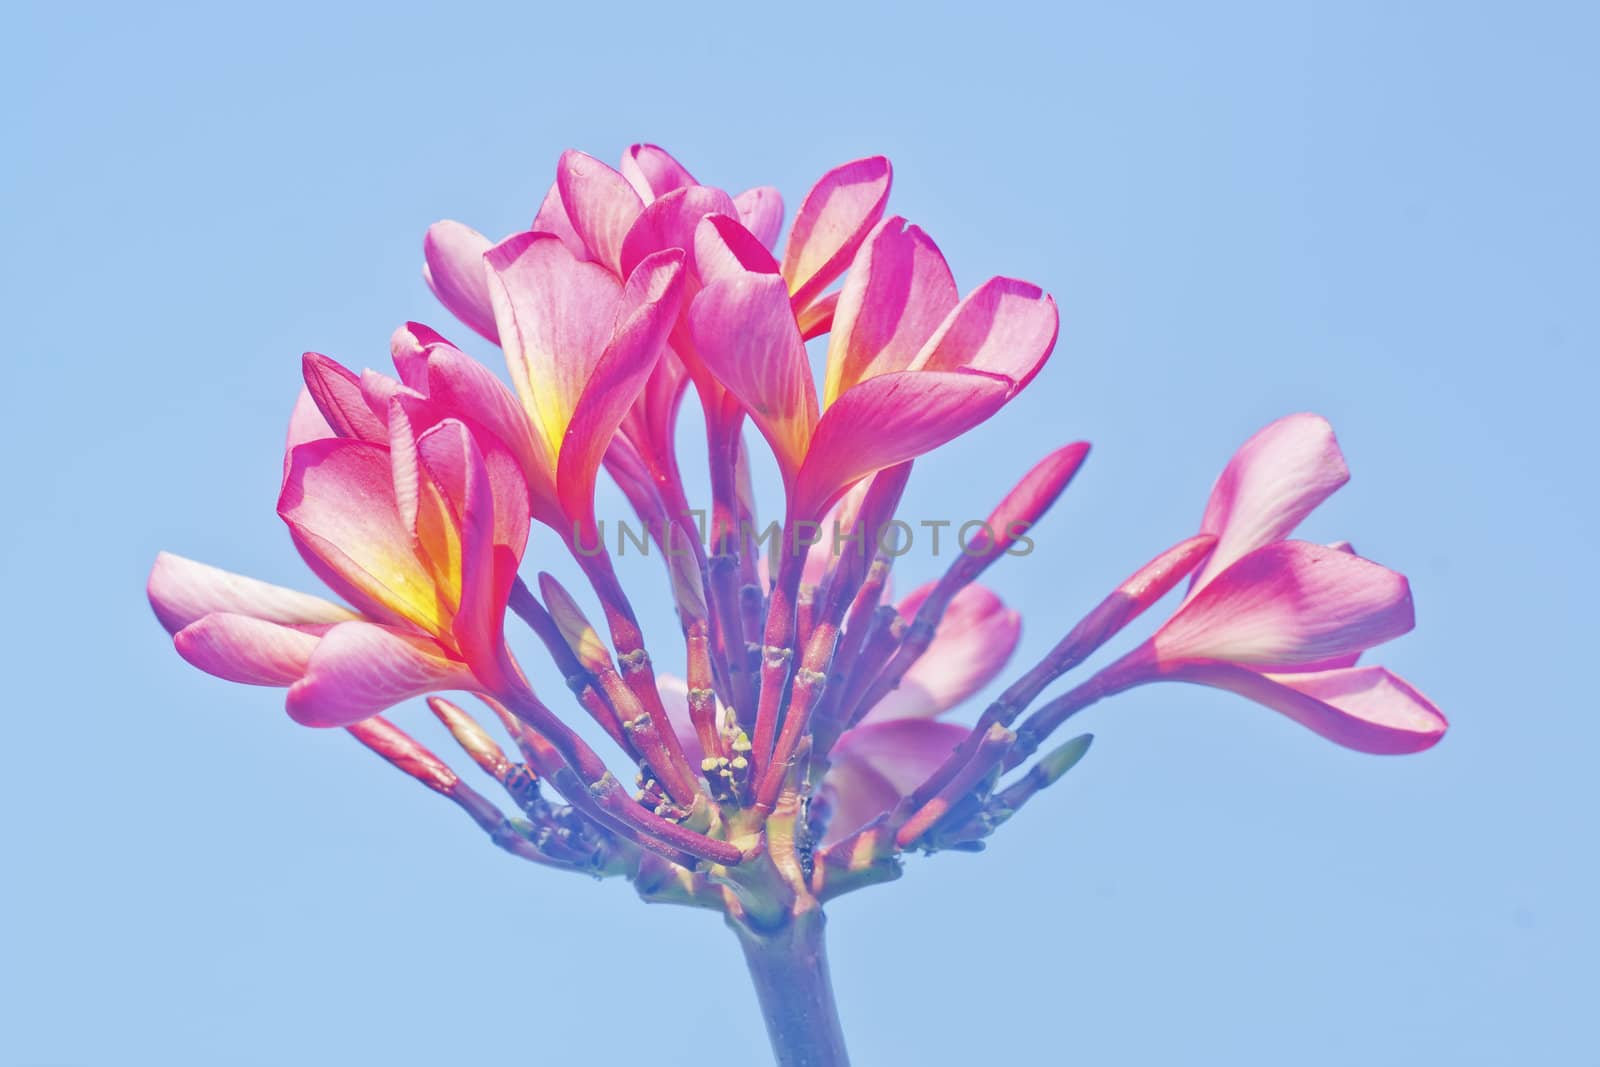 Silhouetted against the blue sky background with red frangipani , exceptionally bright